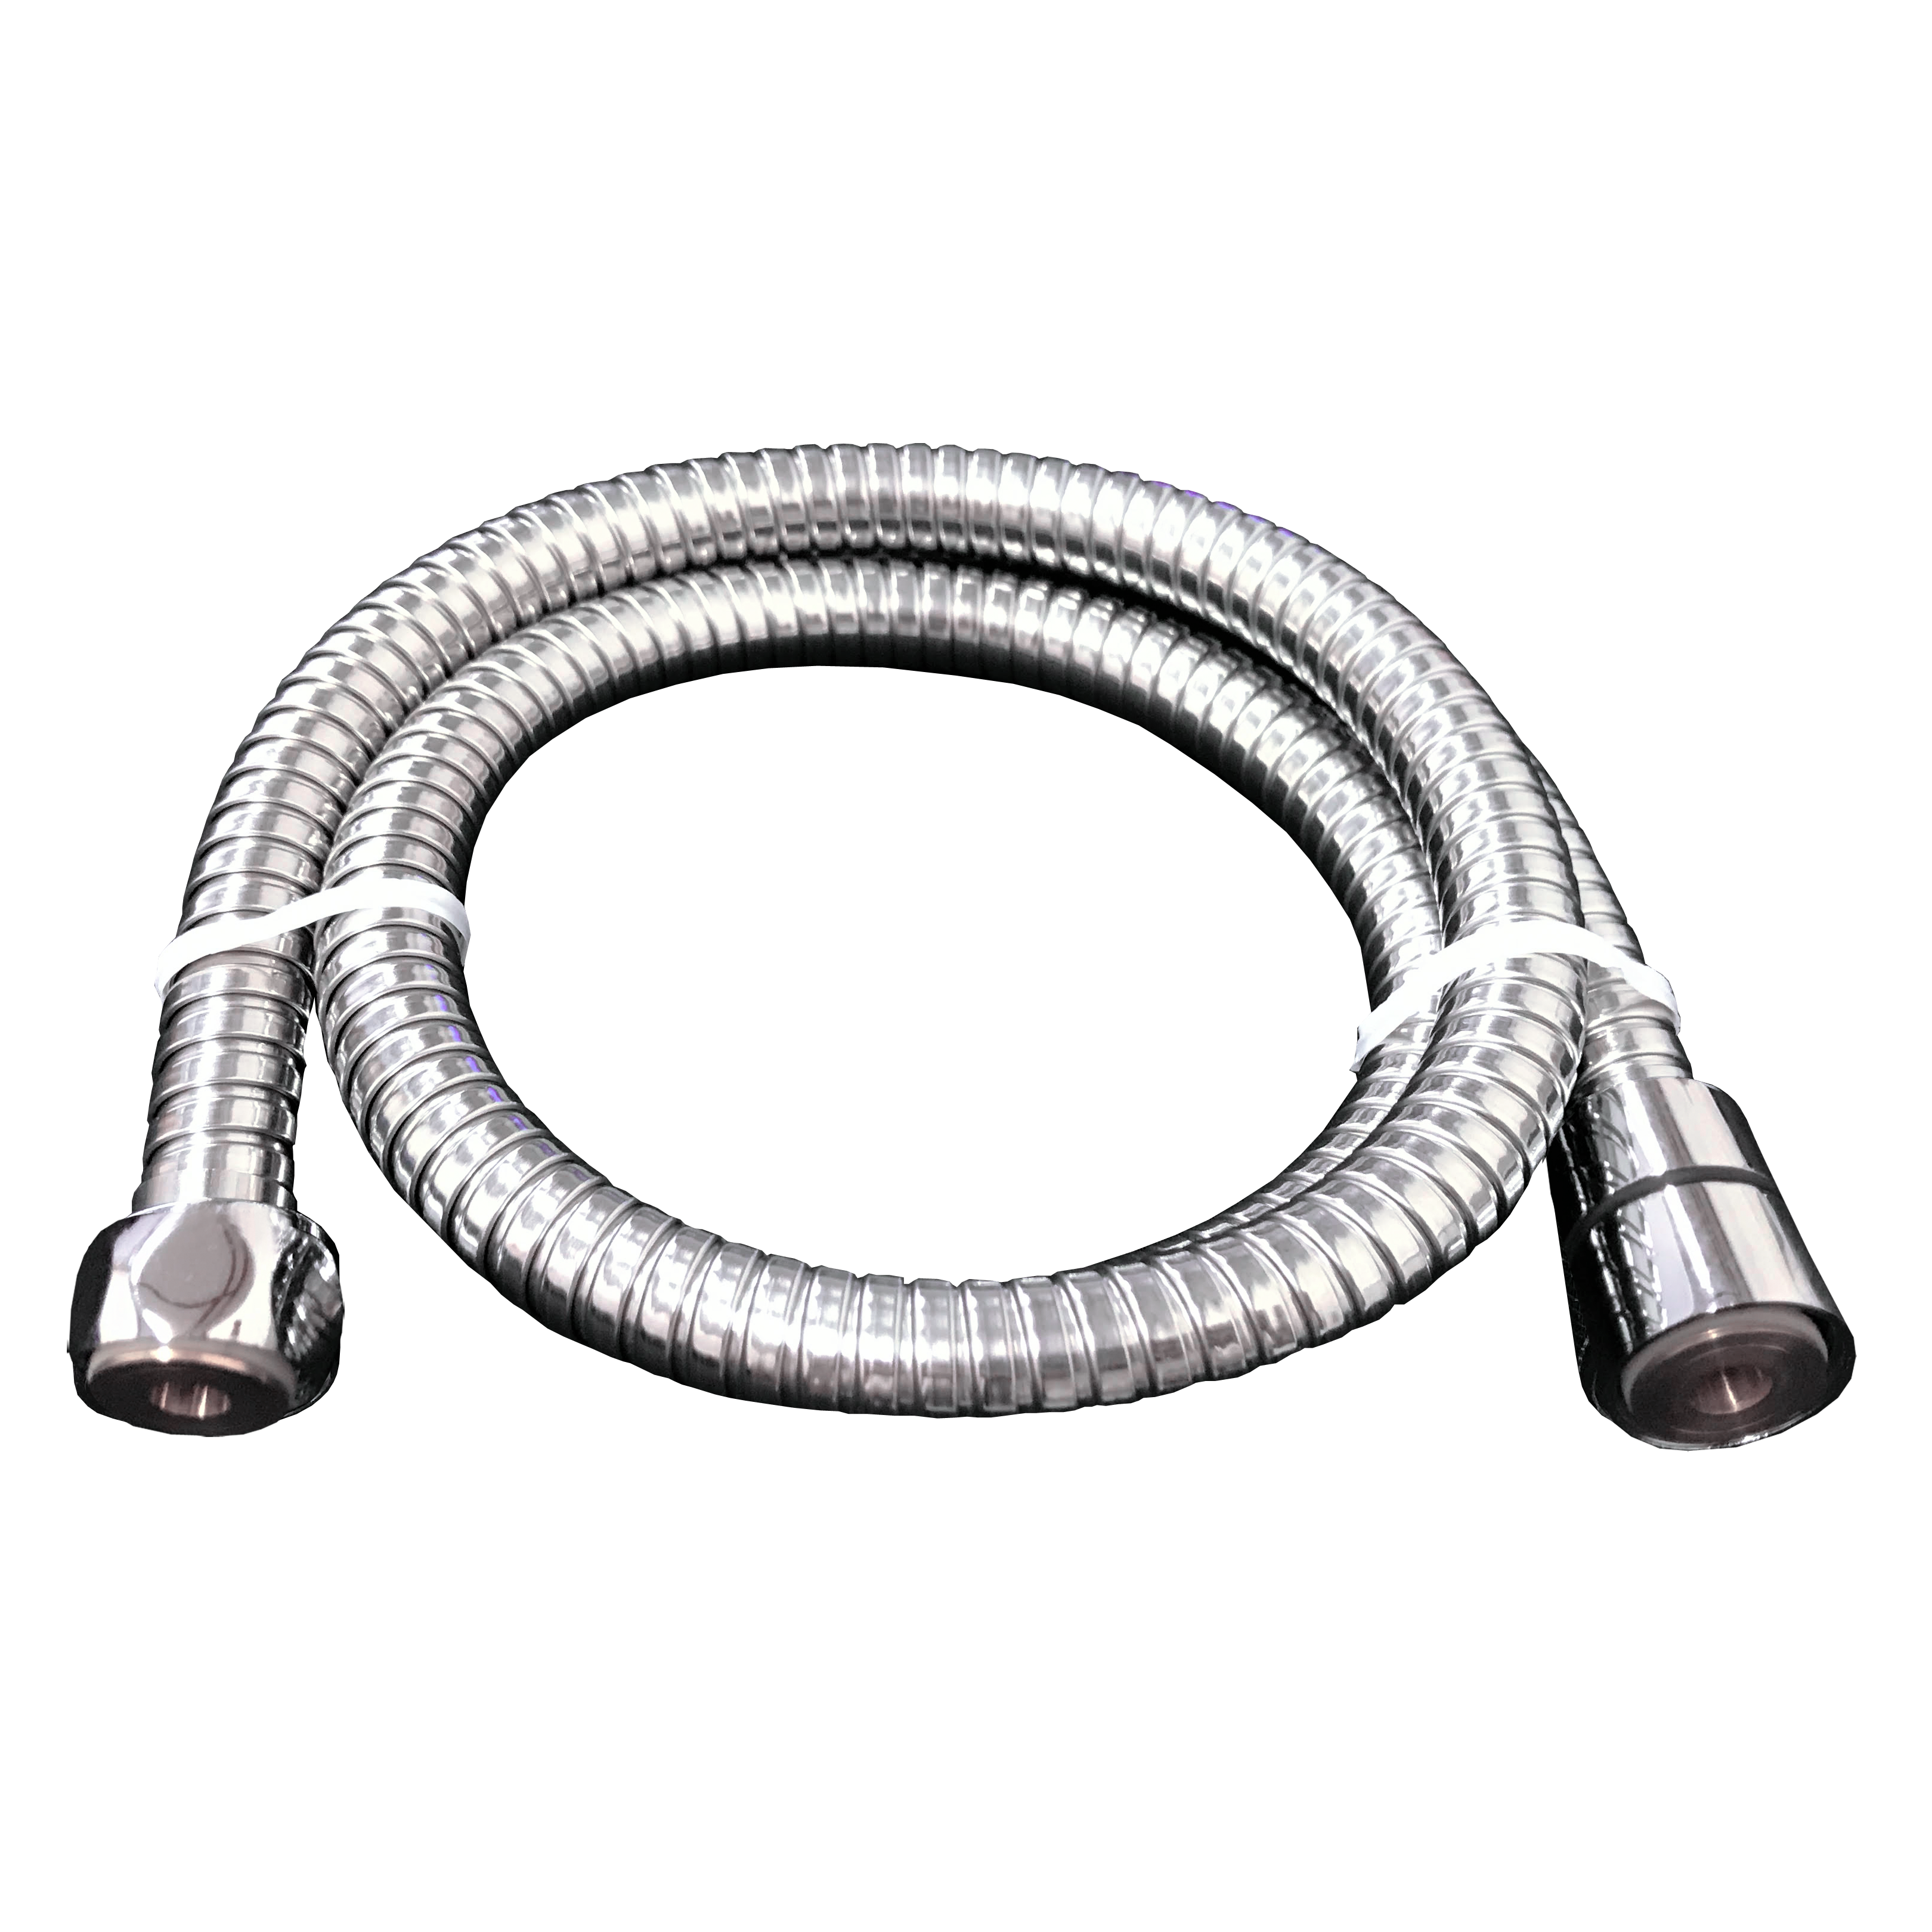 HUSKY 126-1.5m (5' Stainless Steel Double Lock Conical Flexible Hose)